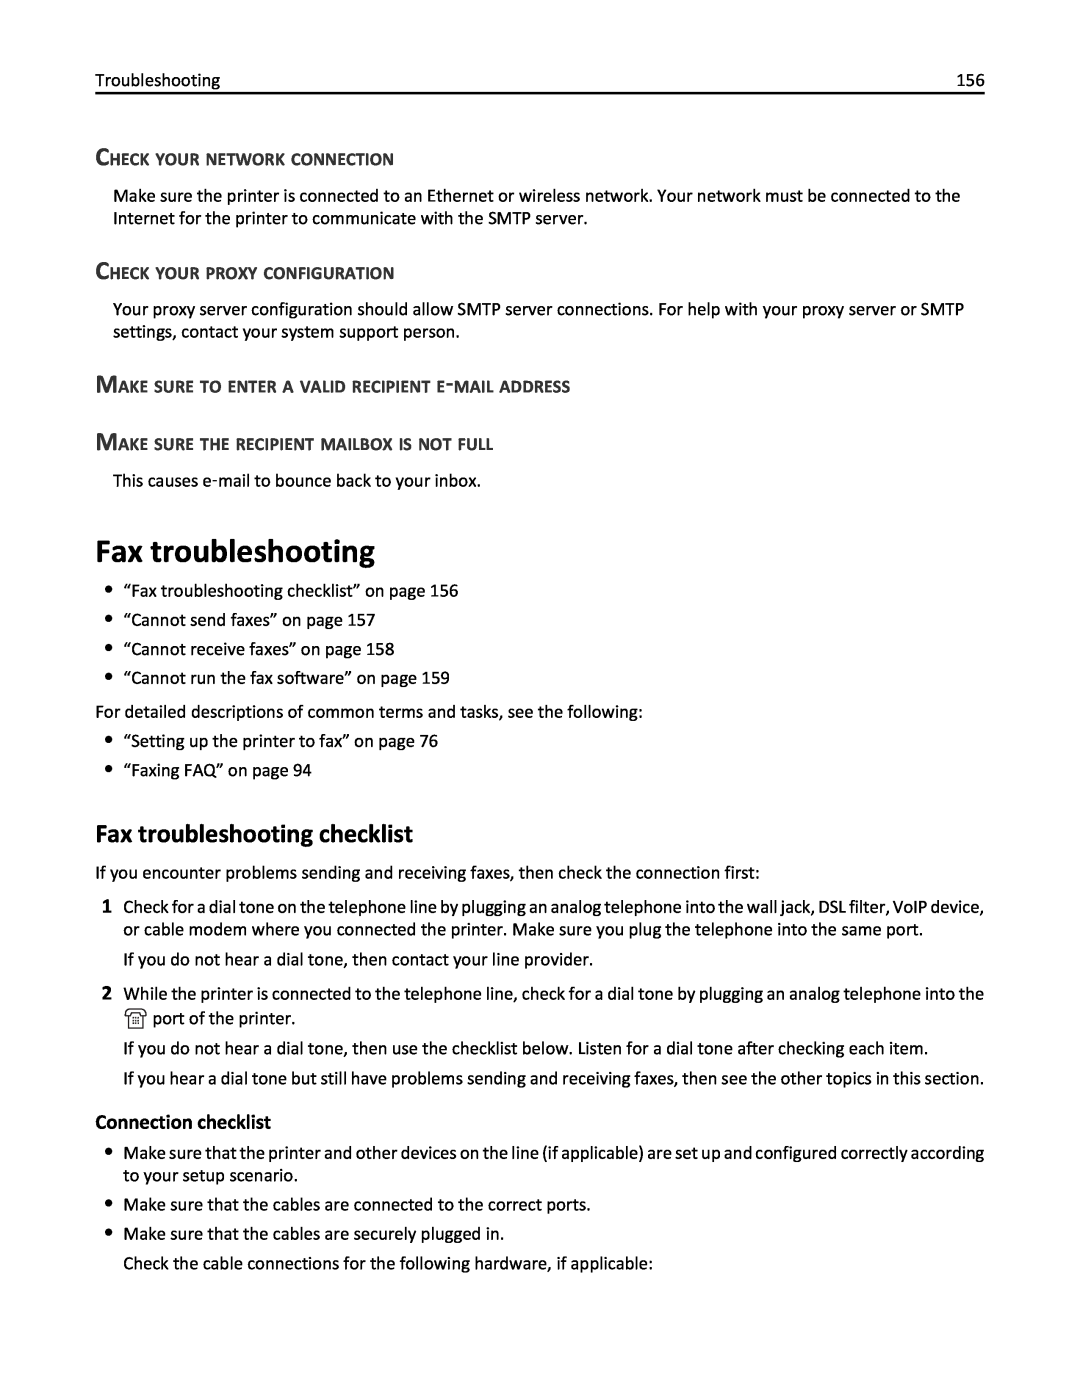 Lexmark PRO4000C, 90P3000 manual Fax troubleshooting checklist, Connection checklist, Check Your Network Connection 